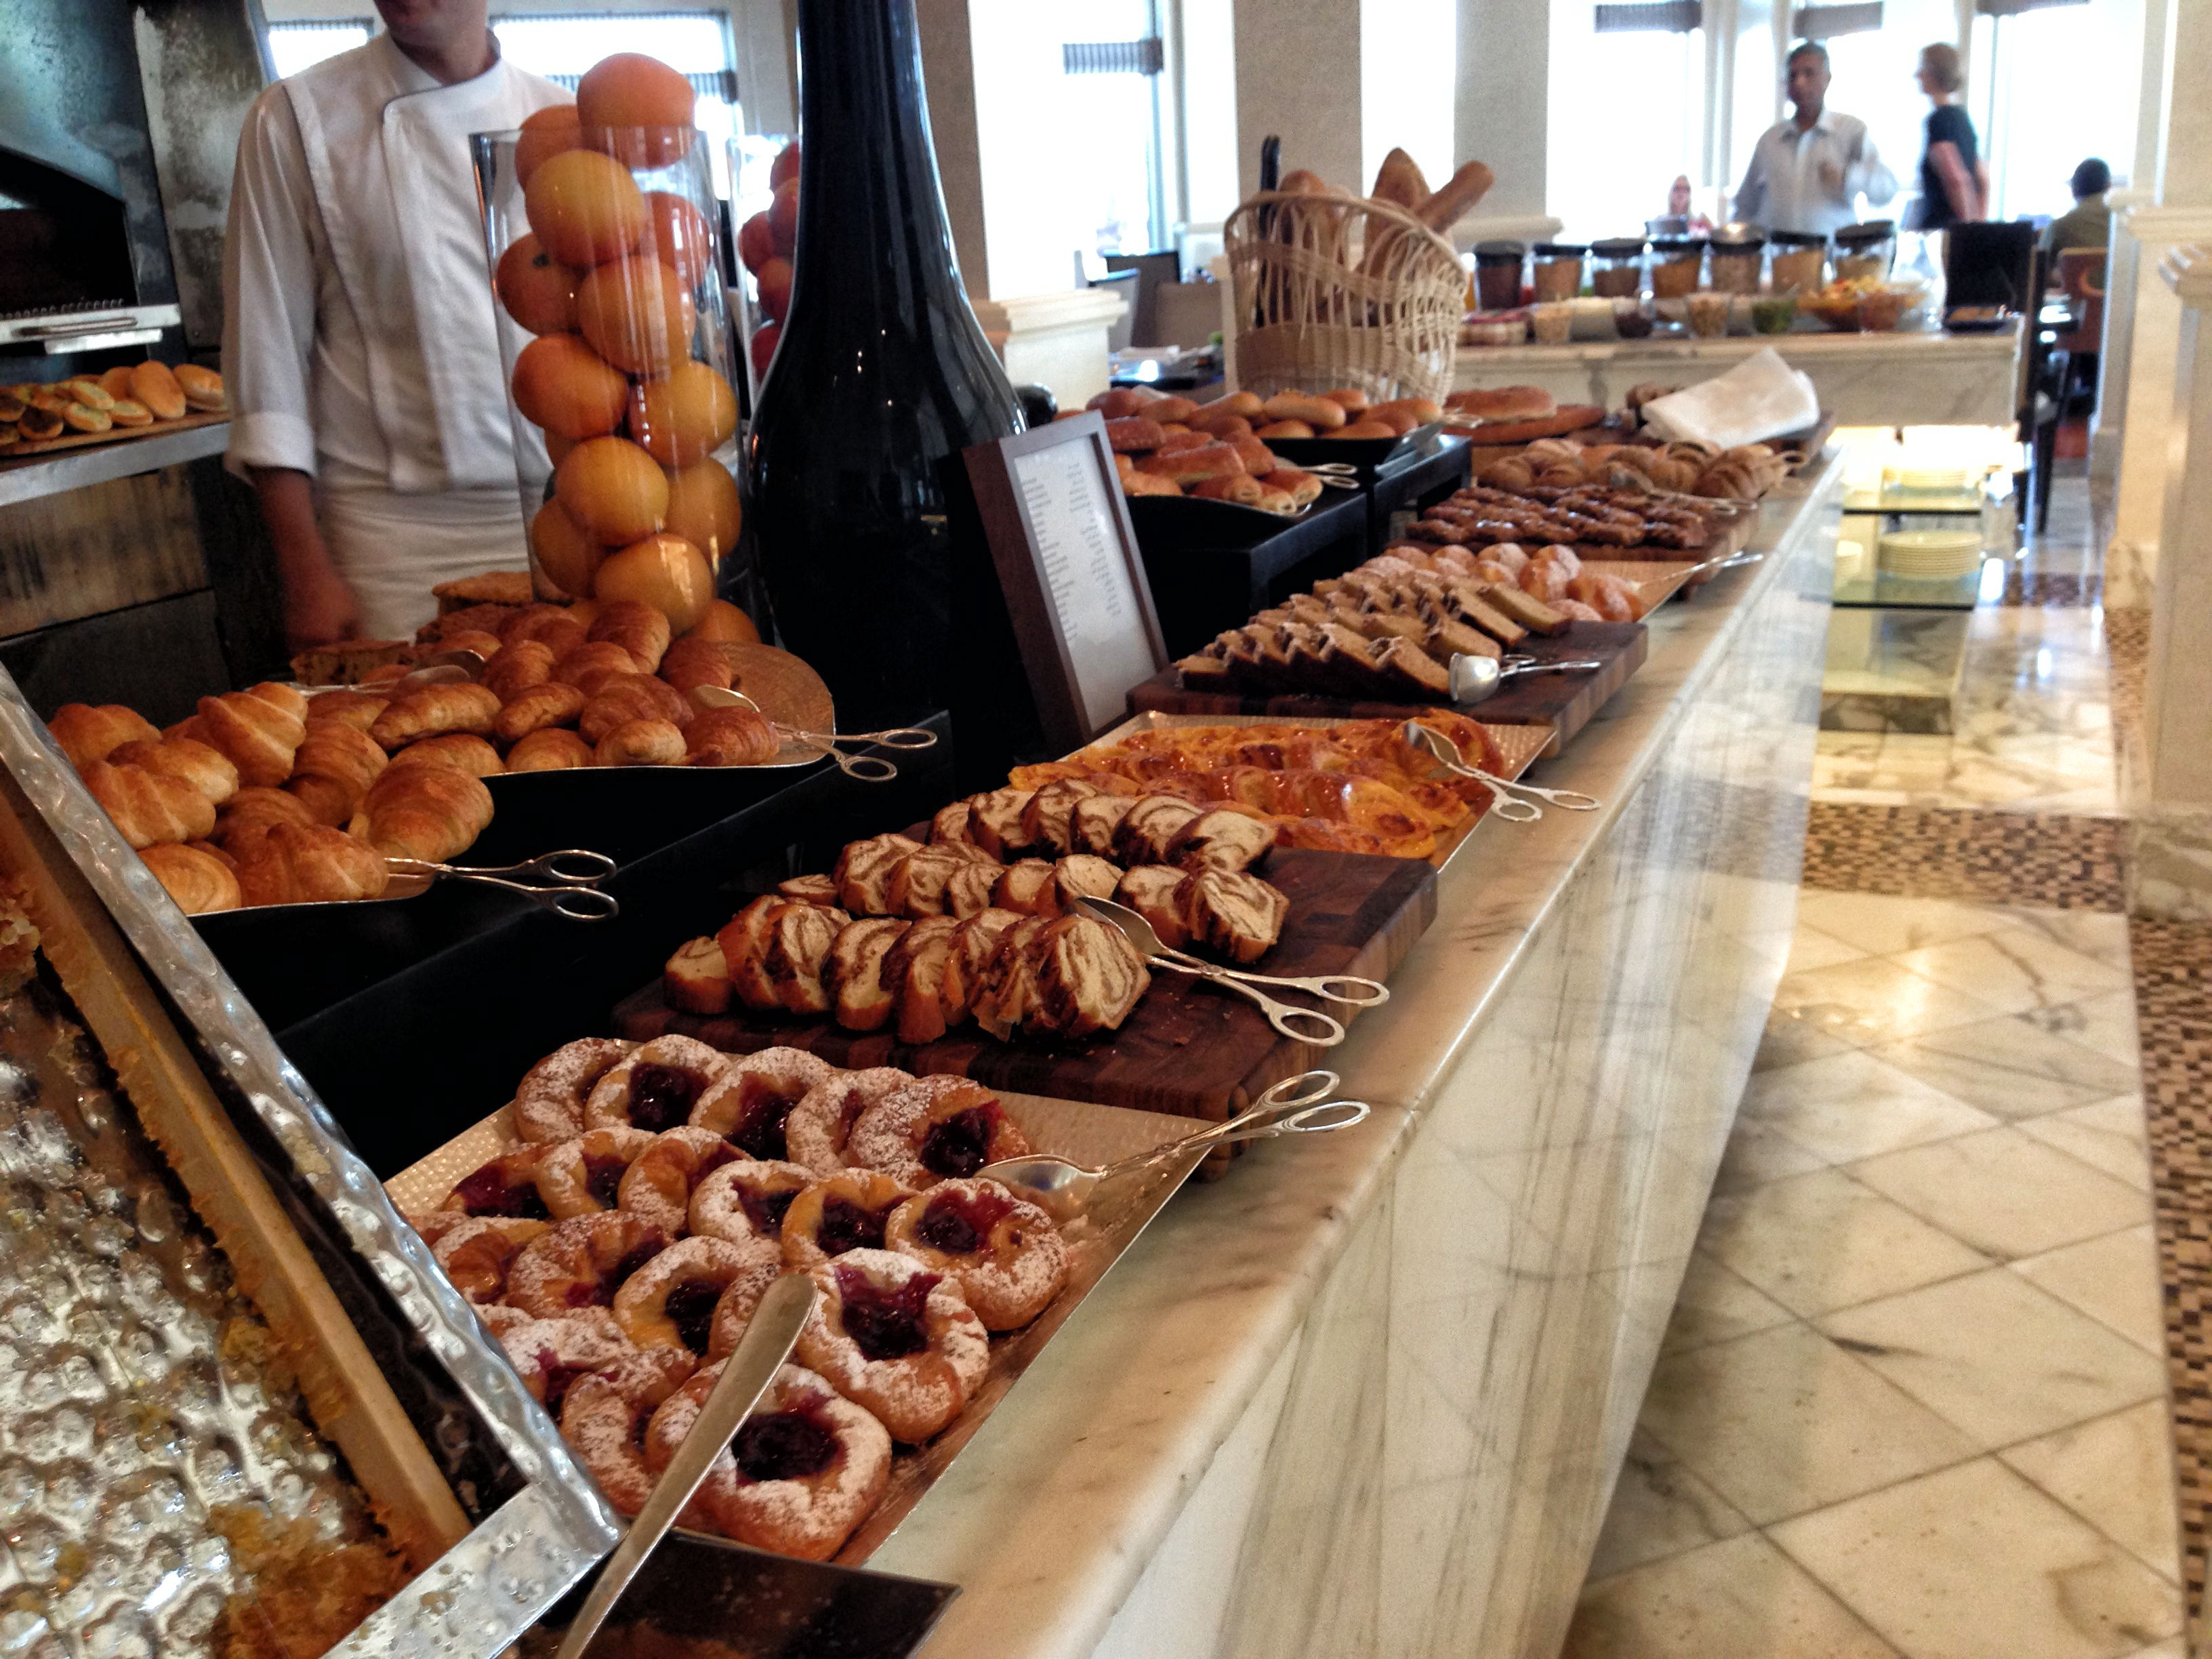 Pastry area